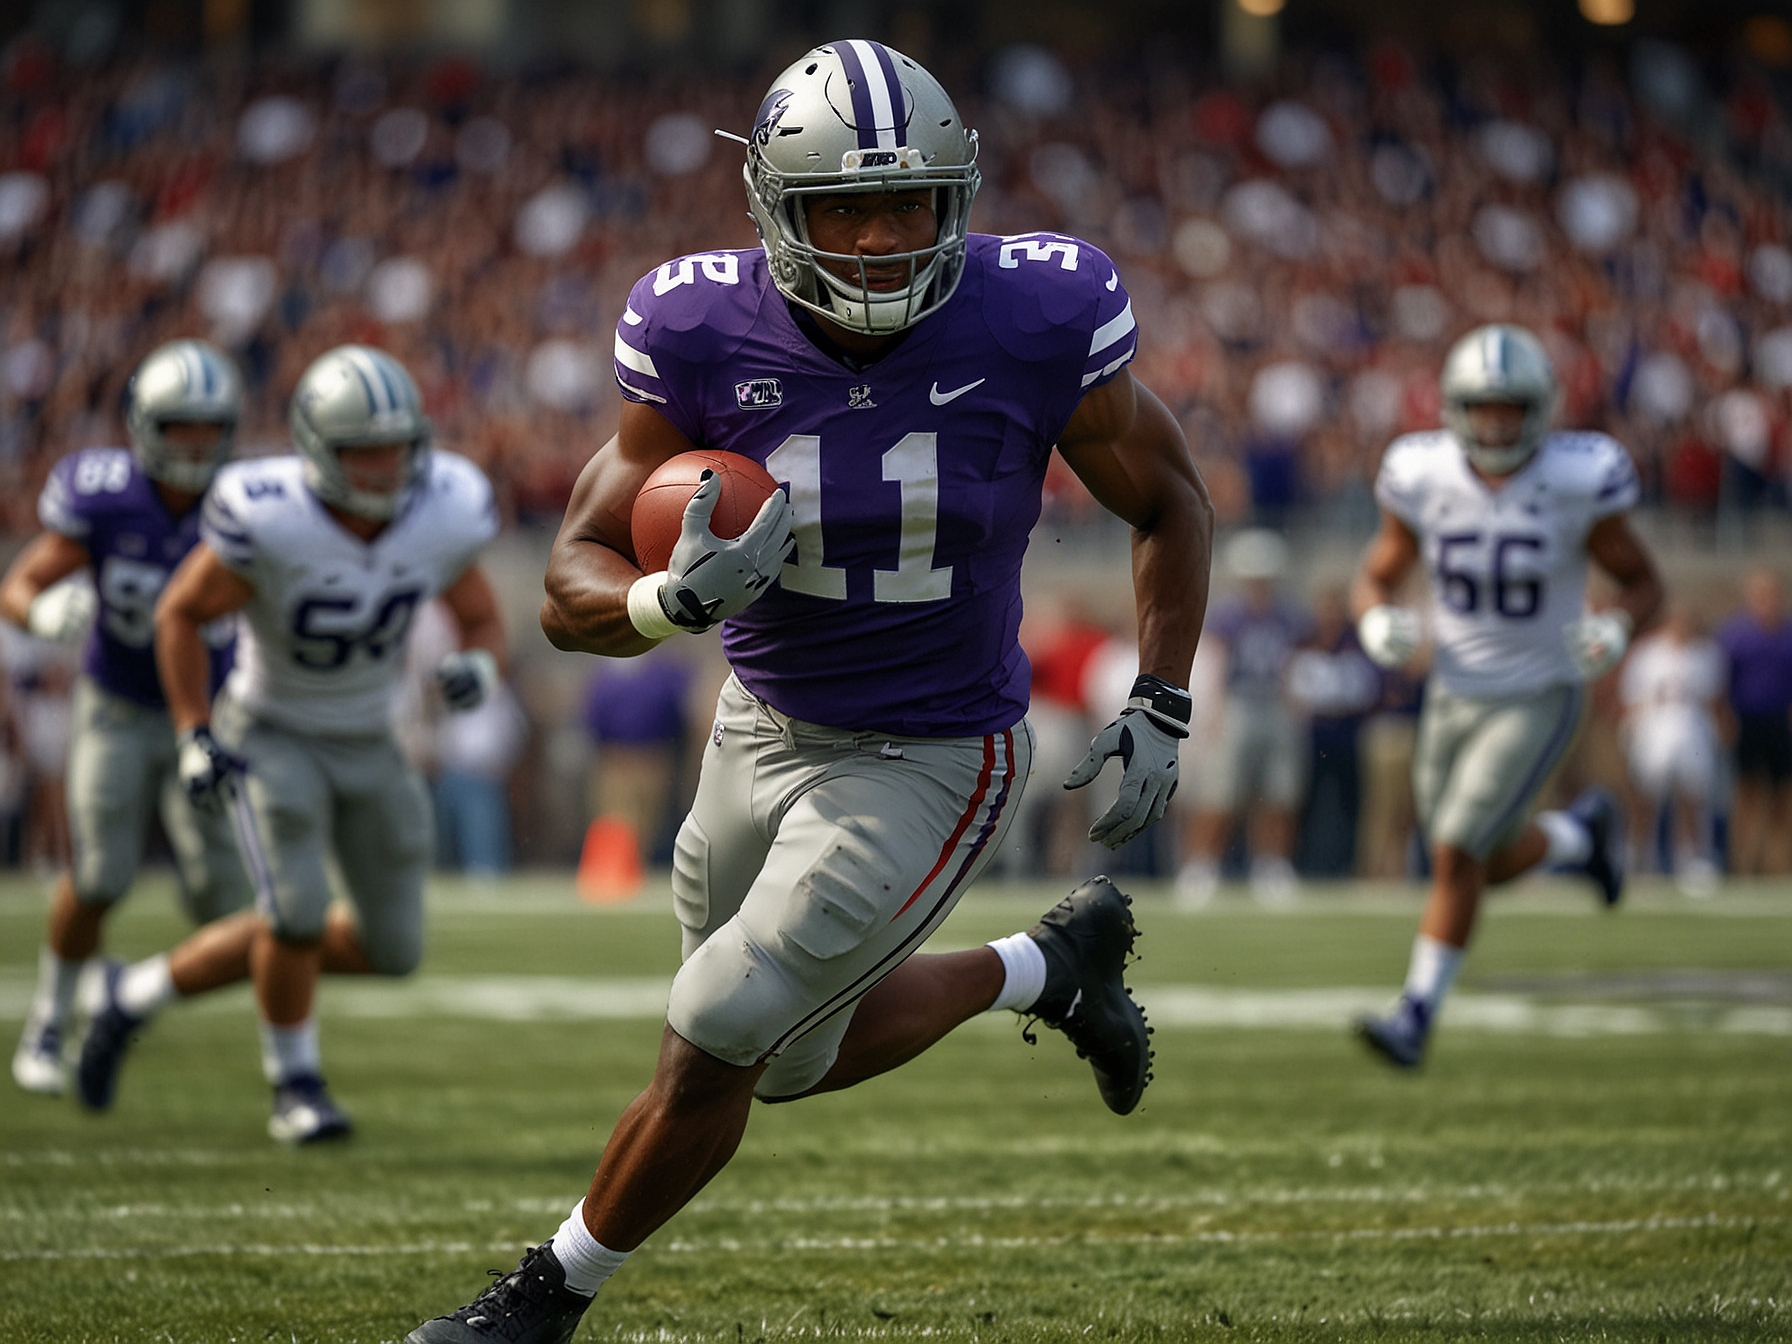 Will Howard showcasing his dual-threat capabilities with a dynamic run during a Kansas State game. This illustration captures Howard's agility and potential impact on Ohio State’s offensive strategy.